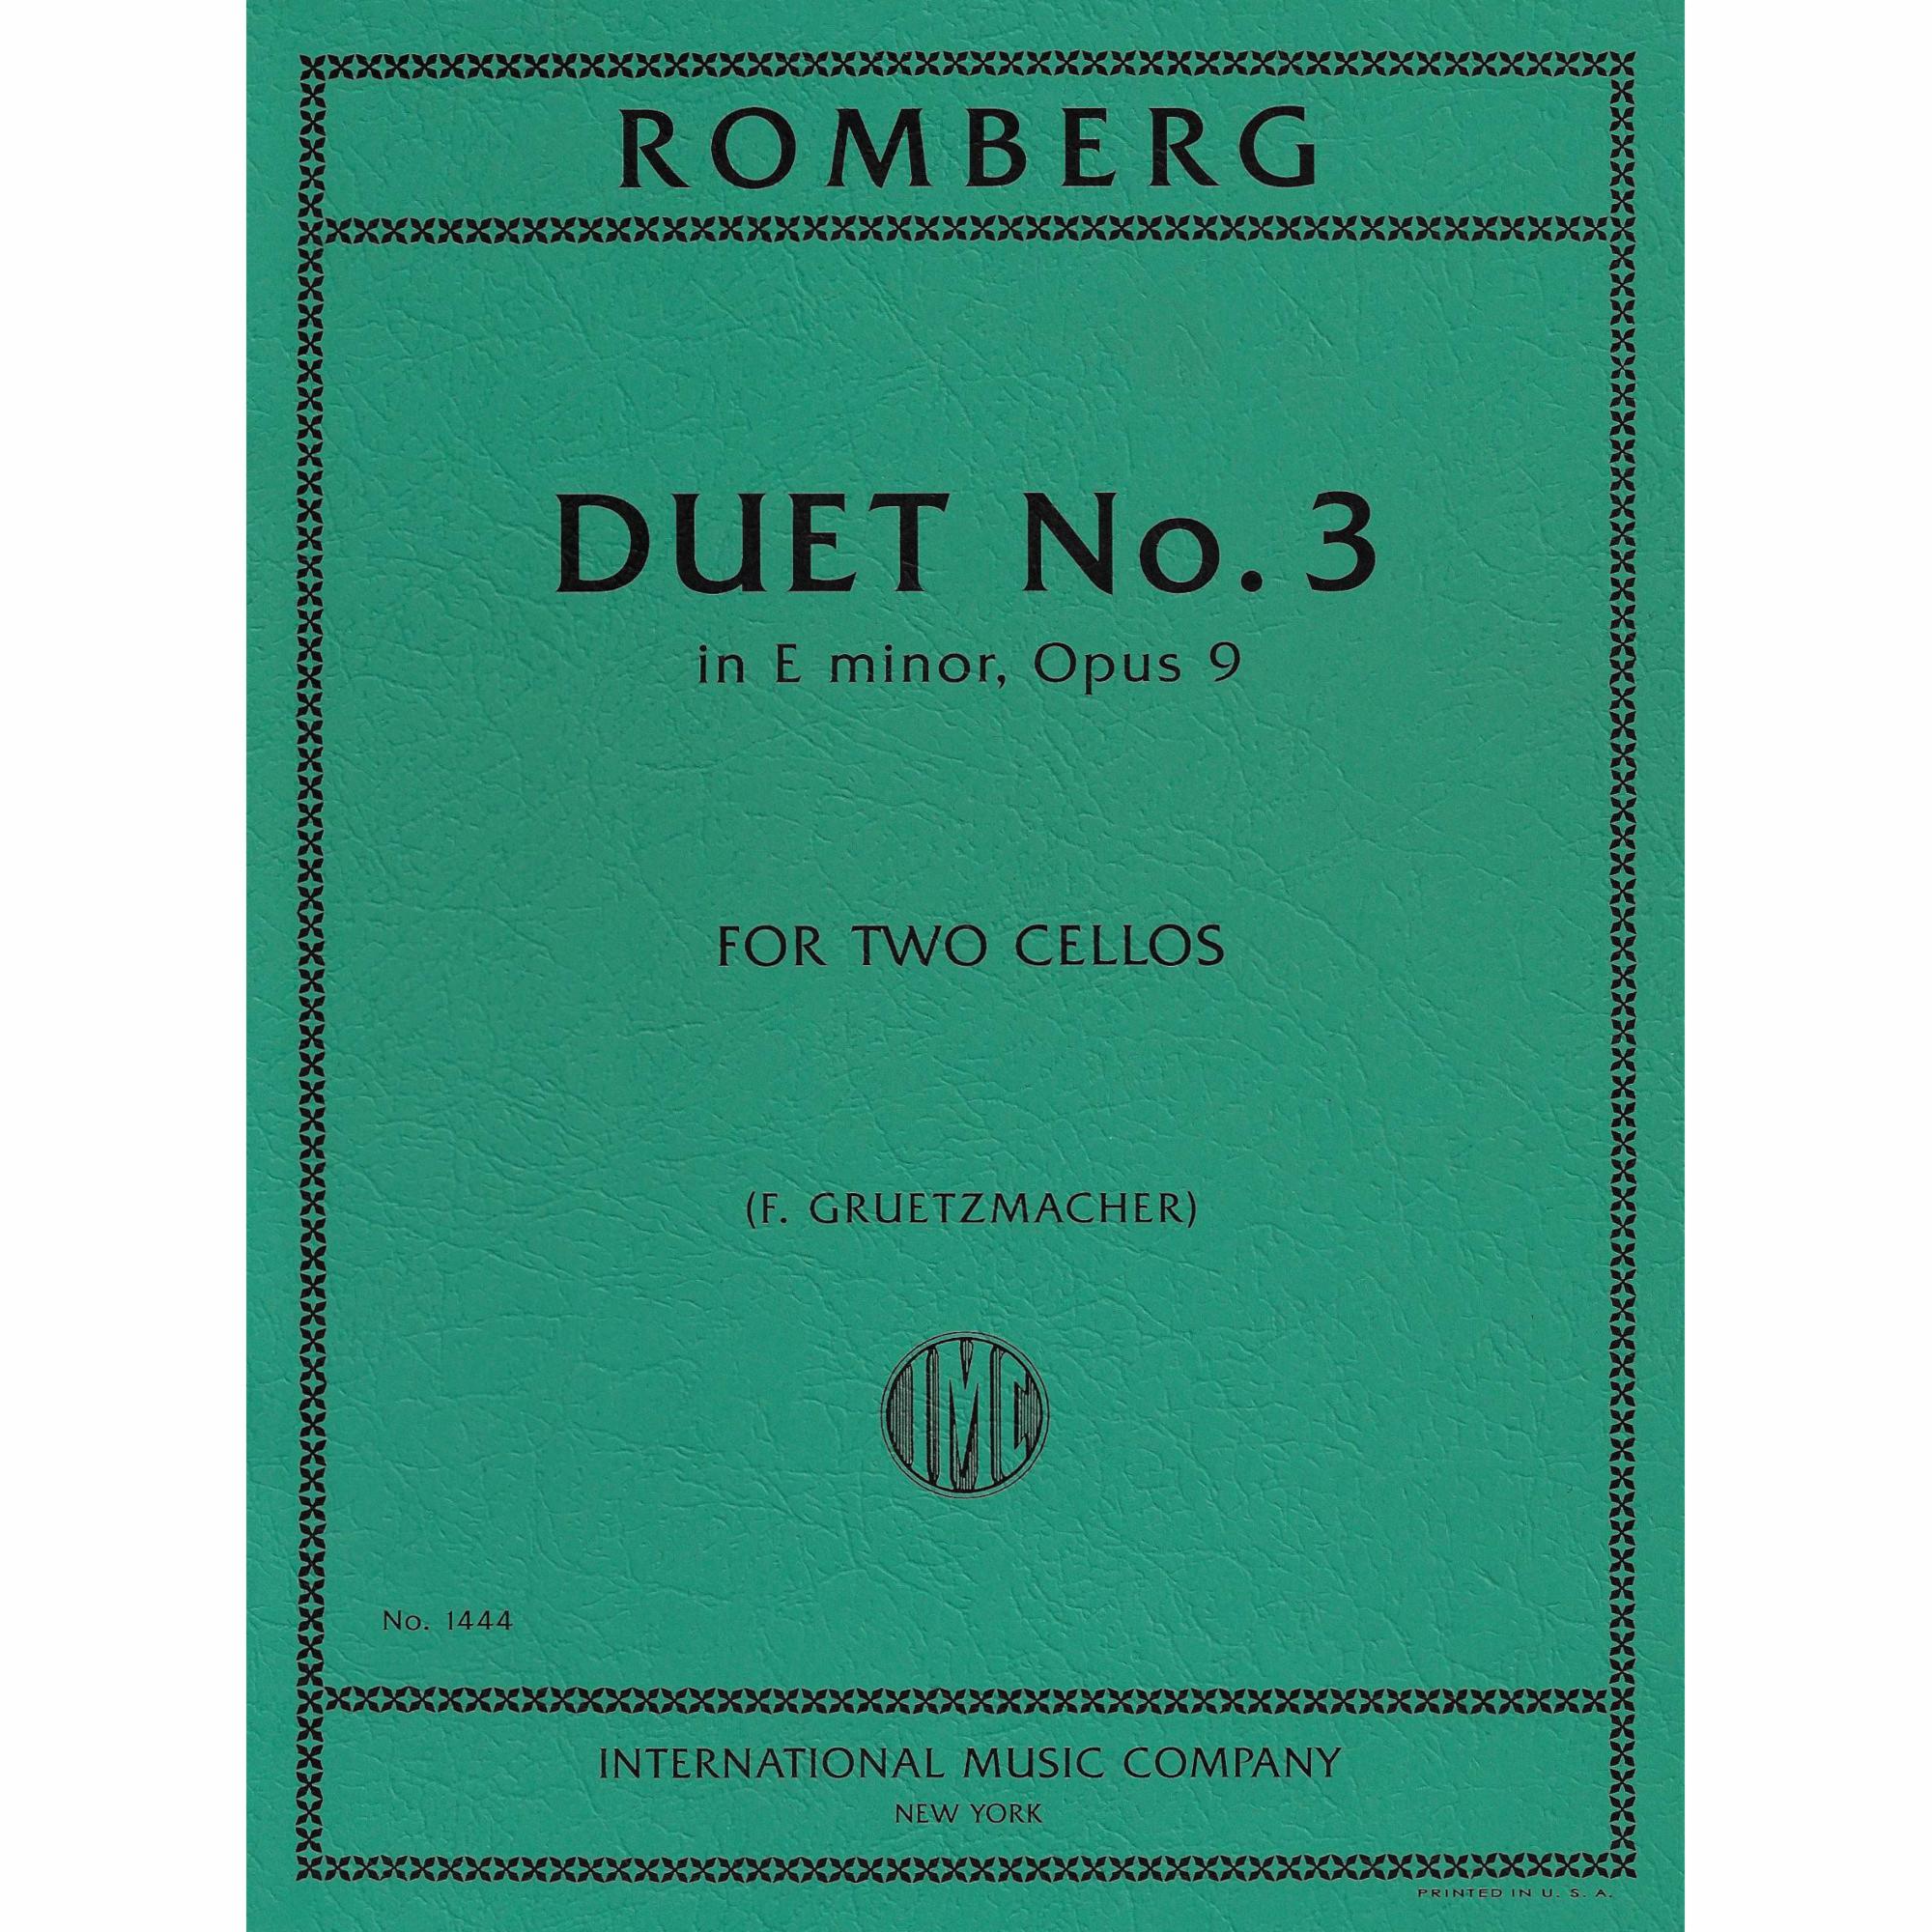 Romberg -- Duet No. 3 in E Minor, Op. 9 for Two Cellos